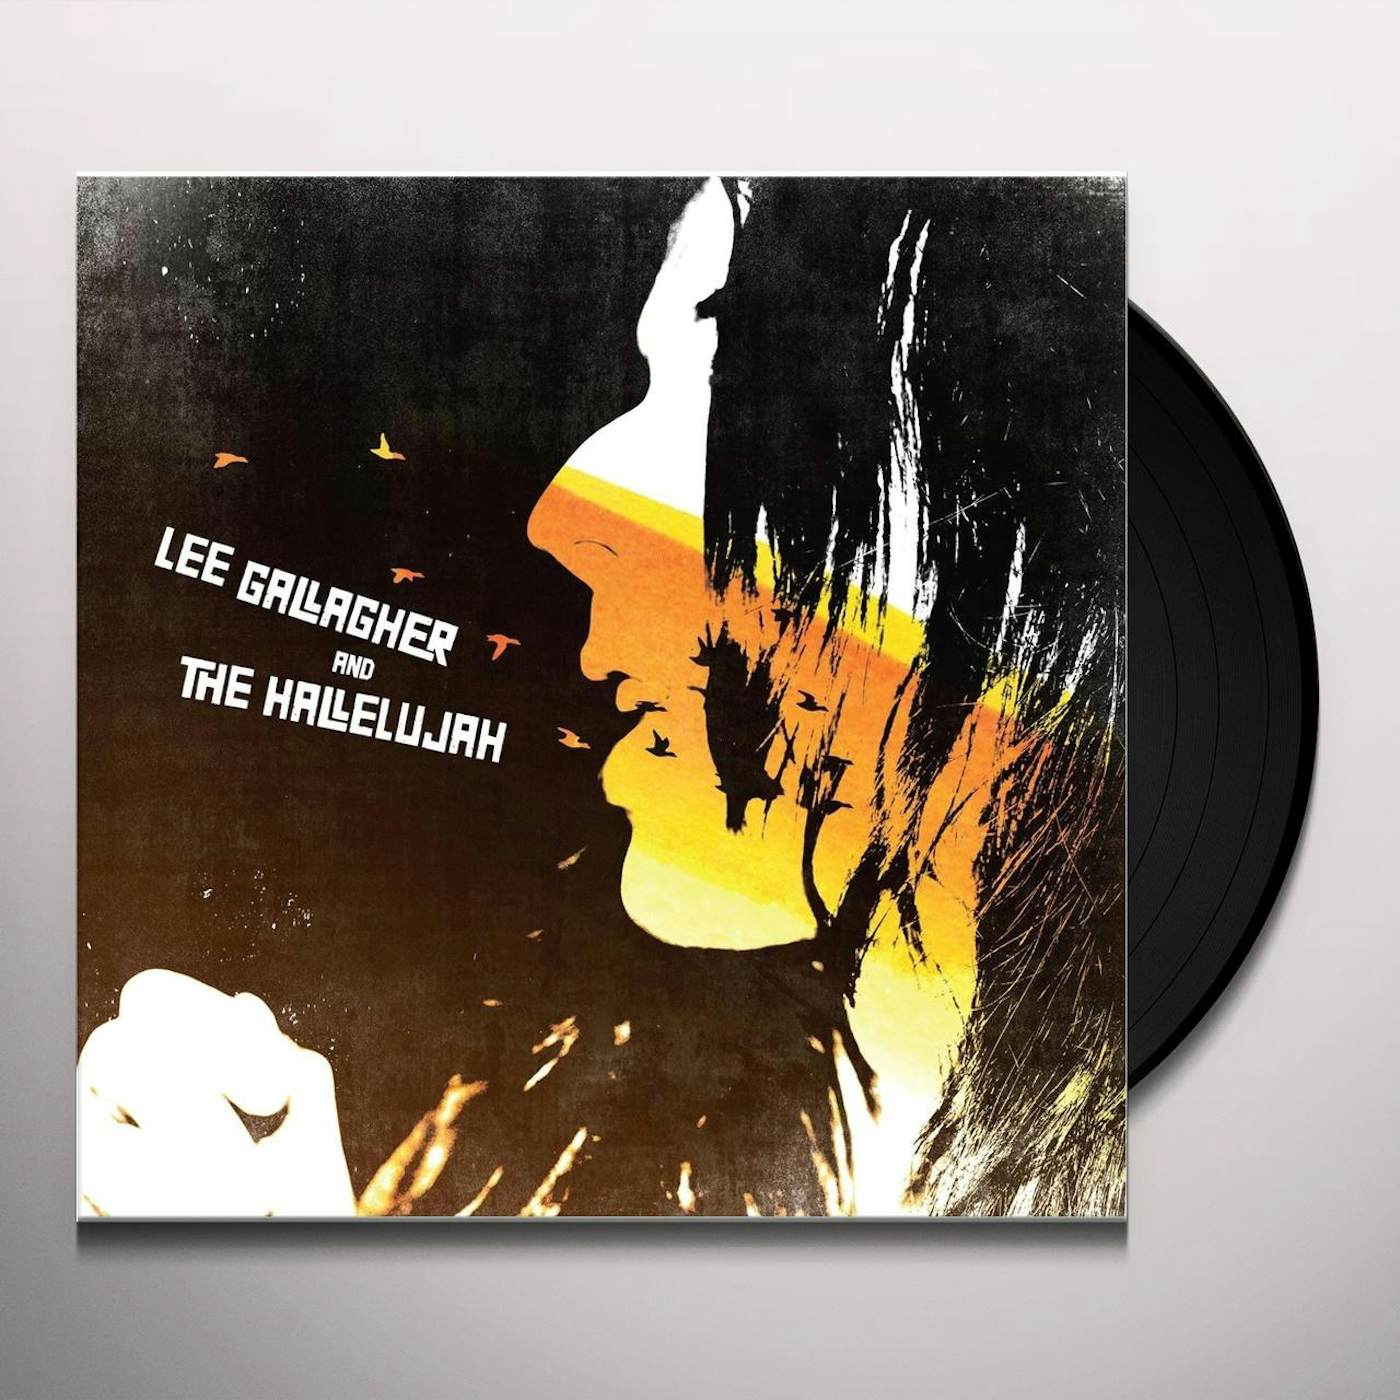 Lee Gallagher and the Hallelujah Vinyl Record